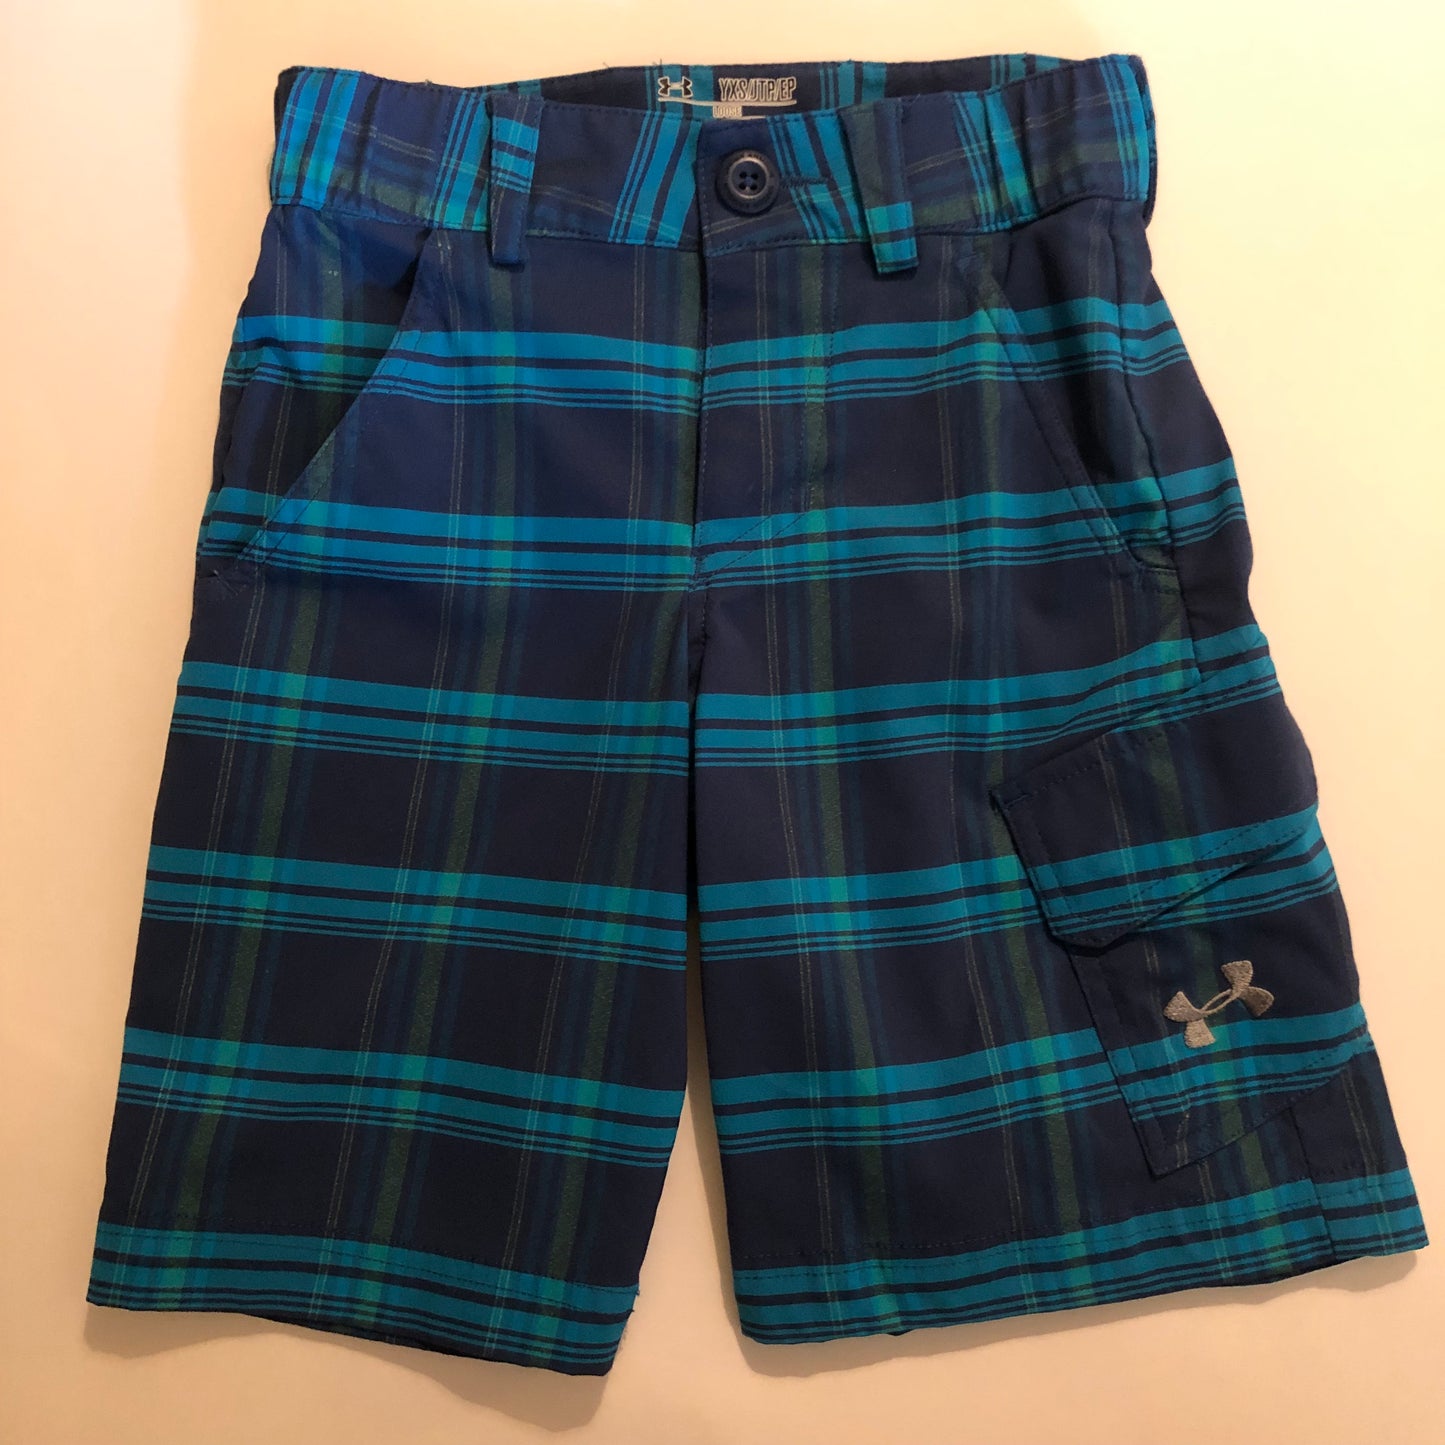 *Reduced* XS Under Armour Golf Shorts- Like New Boy (extra small)